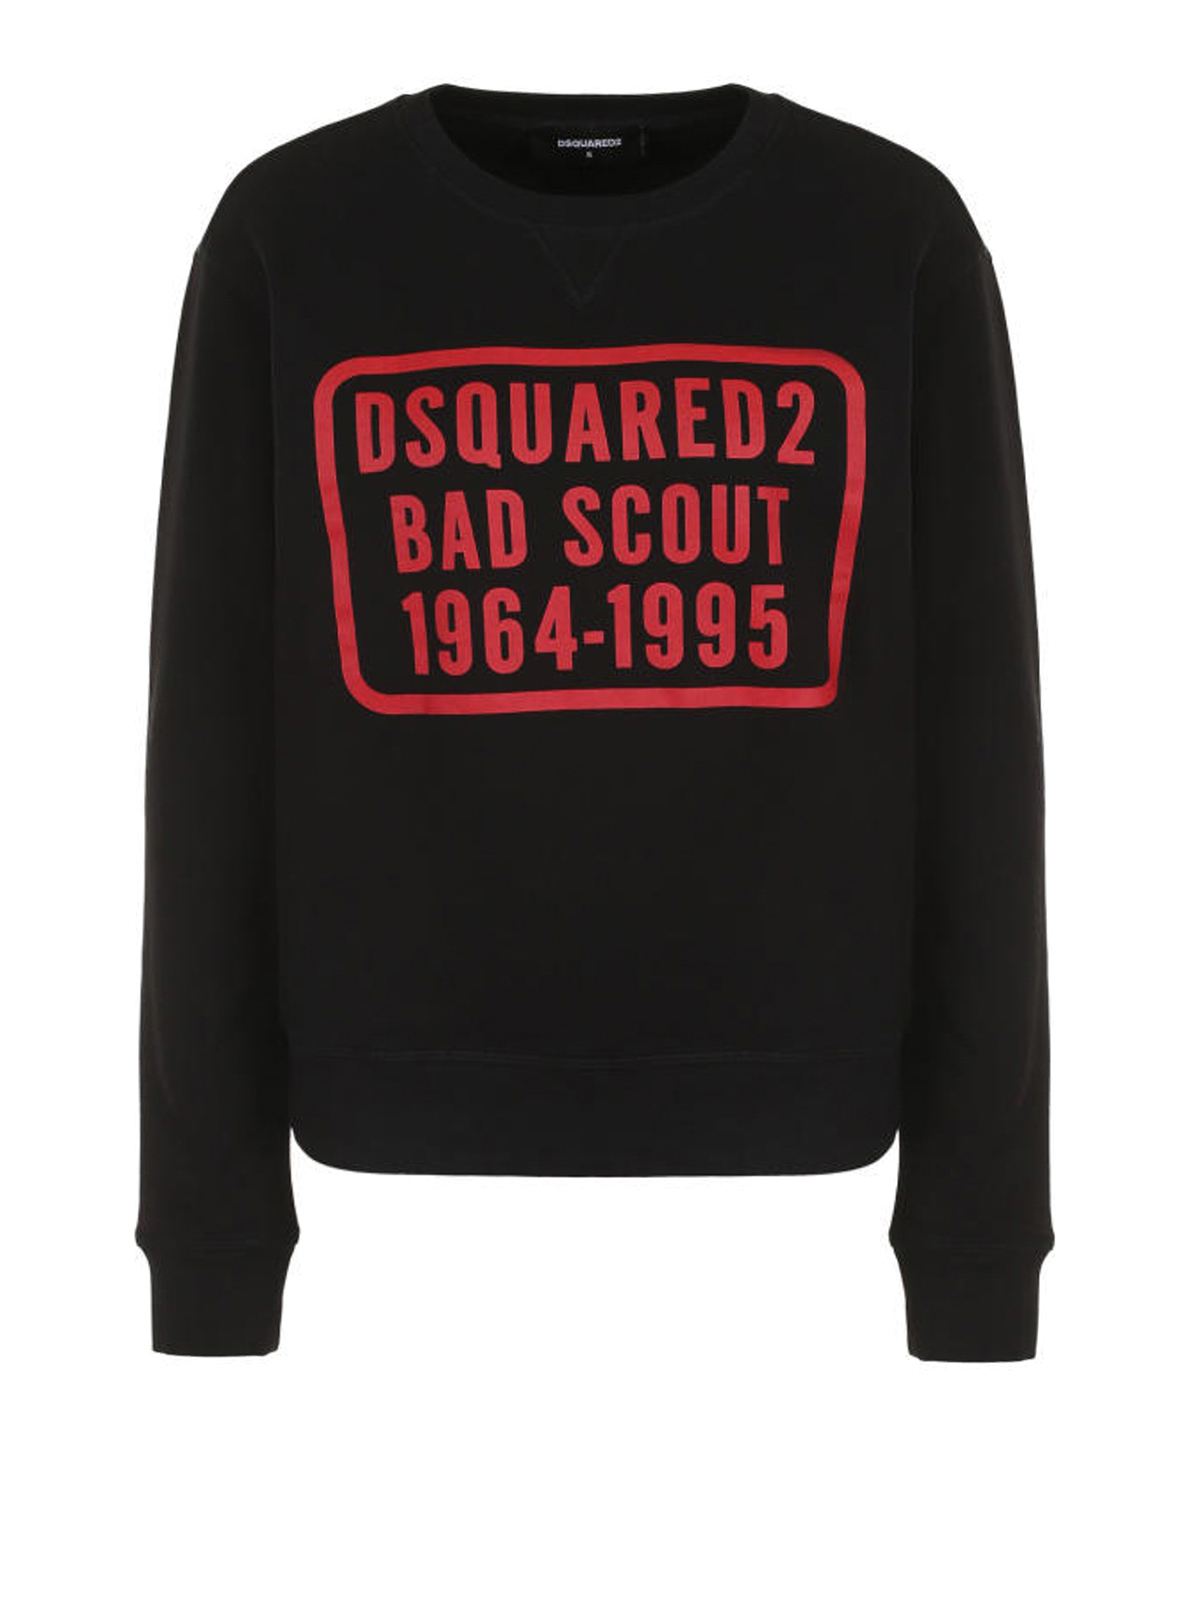 dsquared bad scout